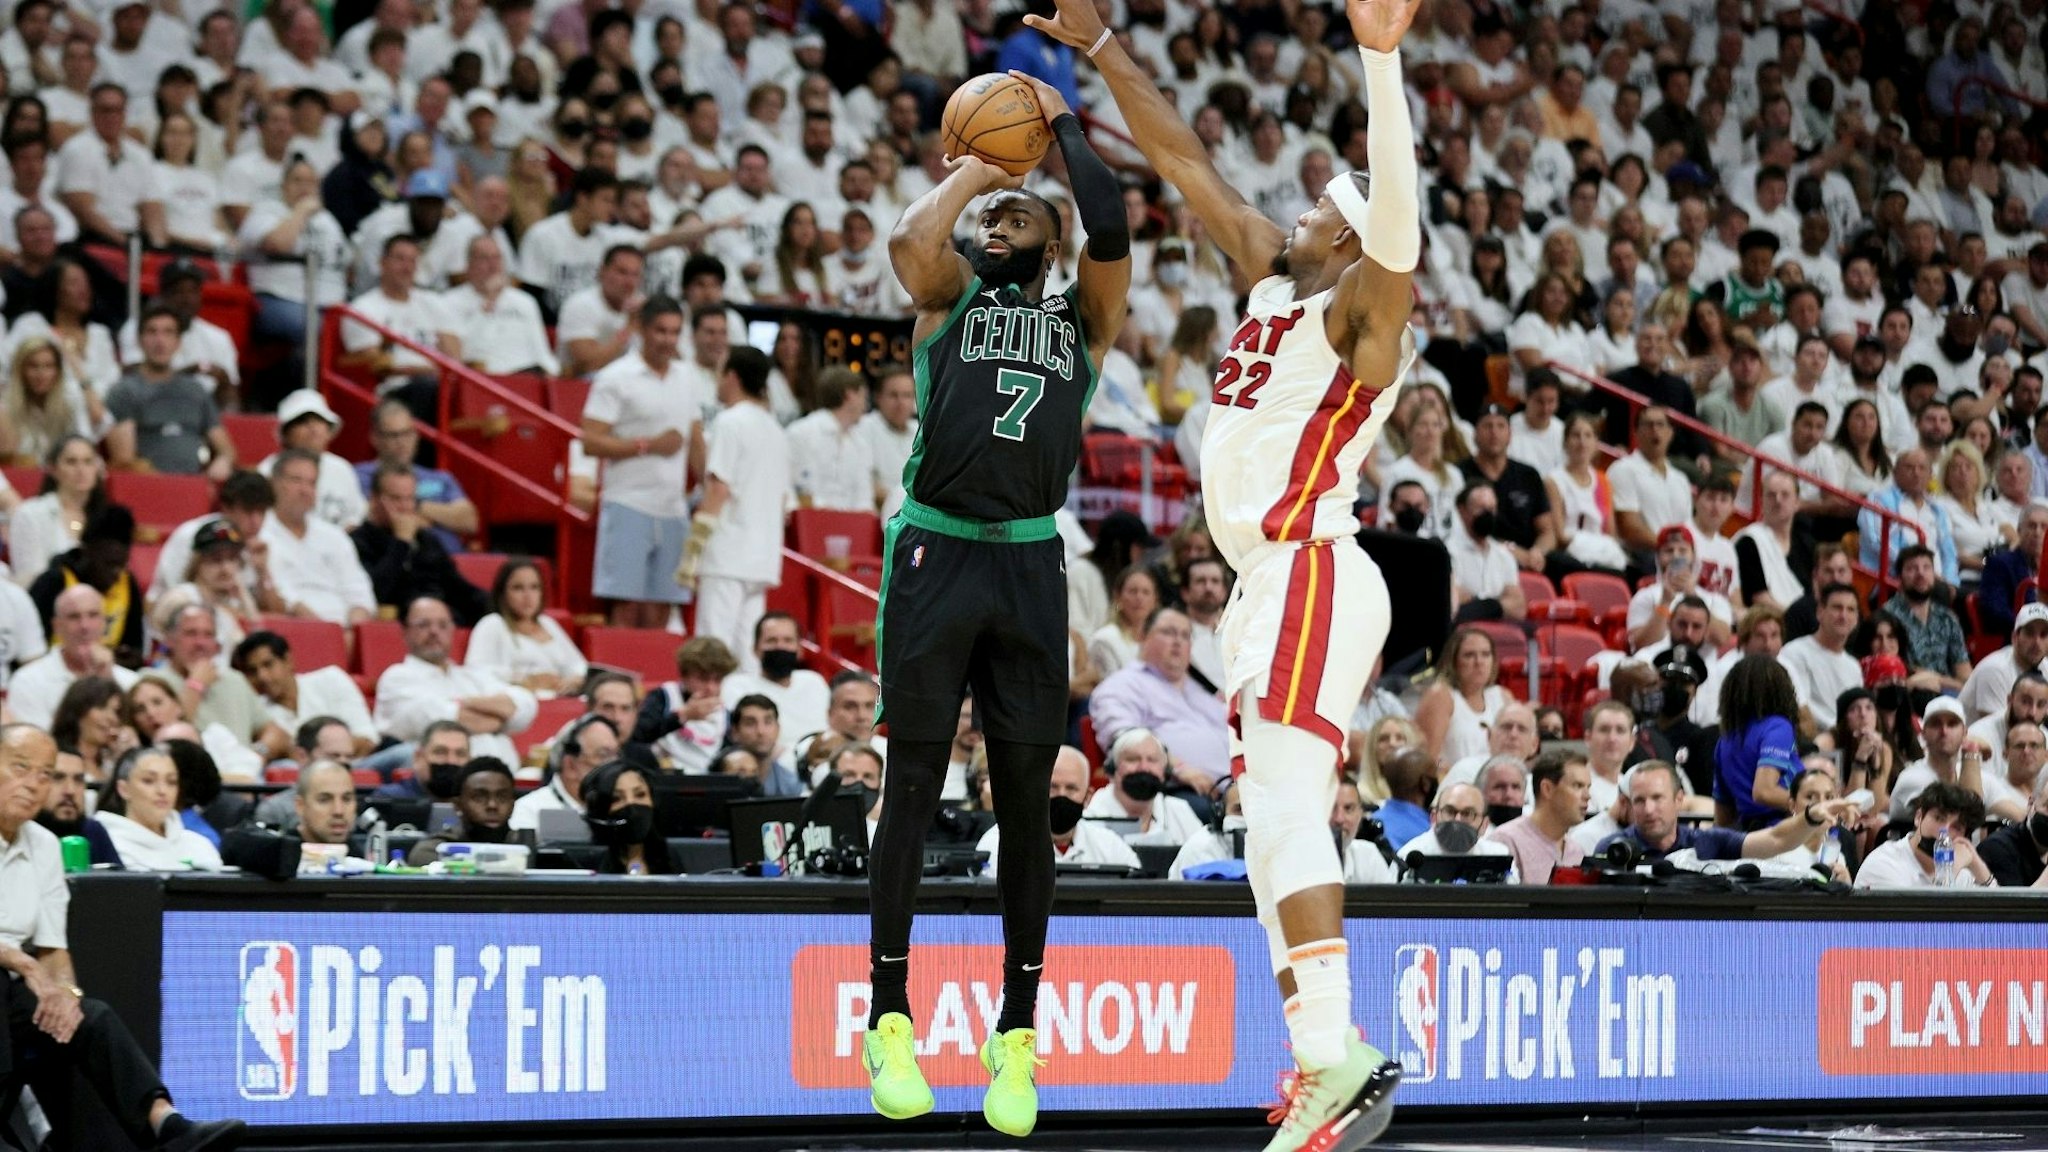 MIAMI, FLORIDA - MAY 25: Jaylen Brown #7 of the Boston Celtics shoots the ball against Jimmy Butler #22 of the Miami Heat during the fourth quarter in Game Five of the 2022 NBA Playoffs Eastern Conference Finals at FTX Arena on May 25, 2022 in Miami, Florida. NOTE TO USER: User expressly acknowledges and agrees that, by downloading and or using this photograph, User is consenting to the terms and conditions of the Getty Images License Agreement.